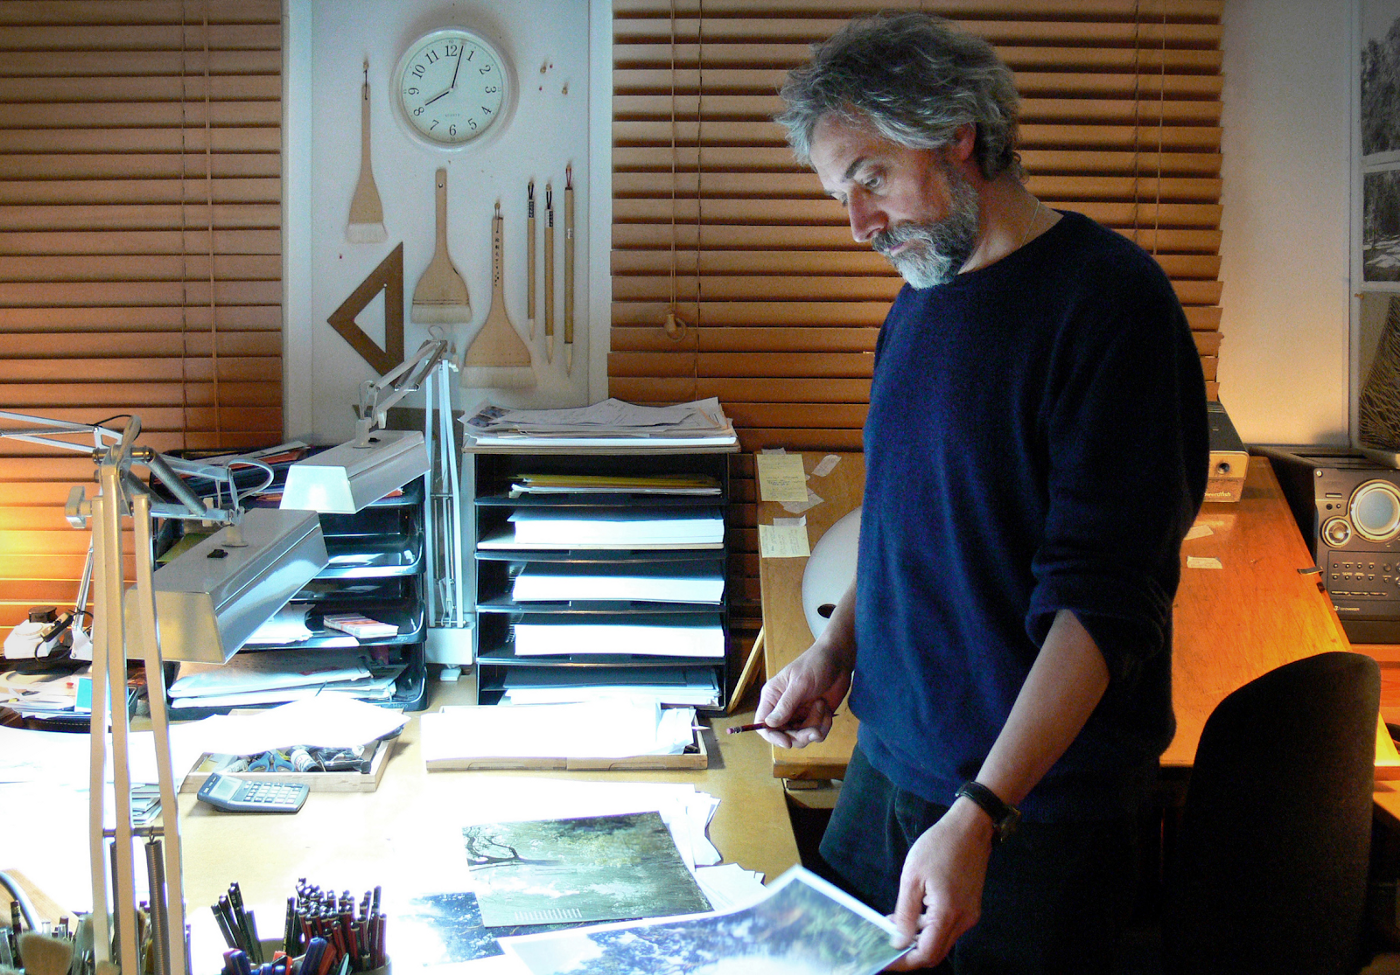 Michael Dudok de Wit: A Life in Animation [Book]